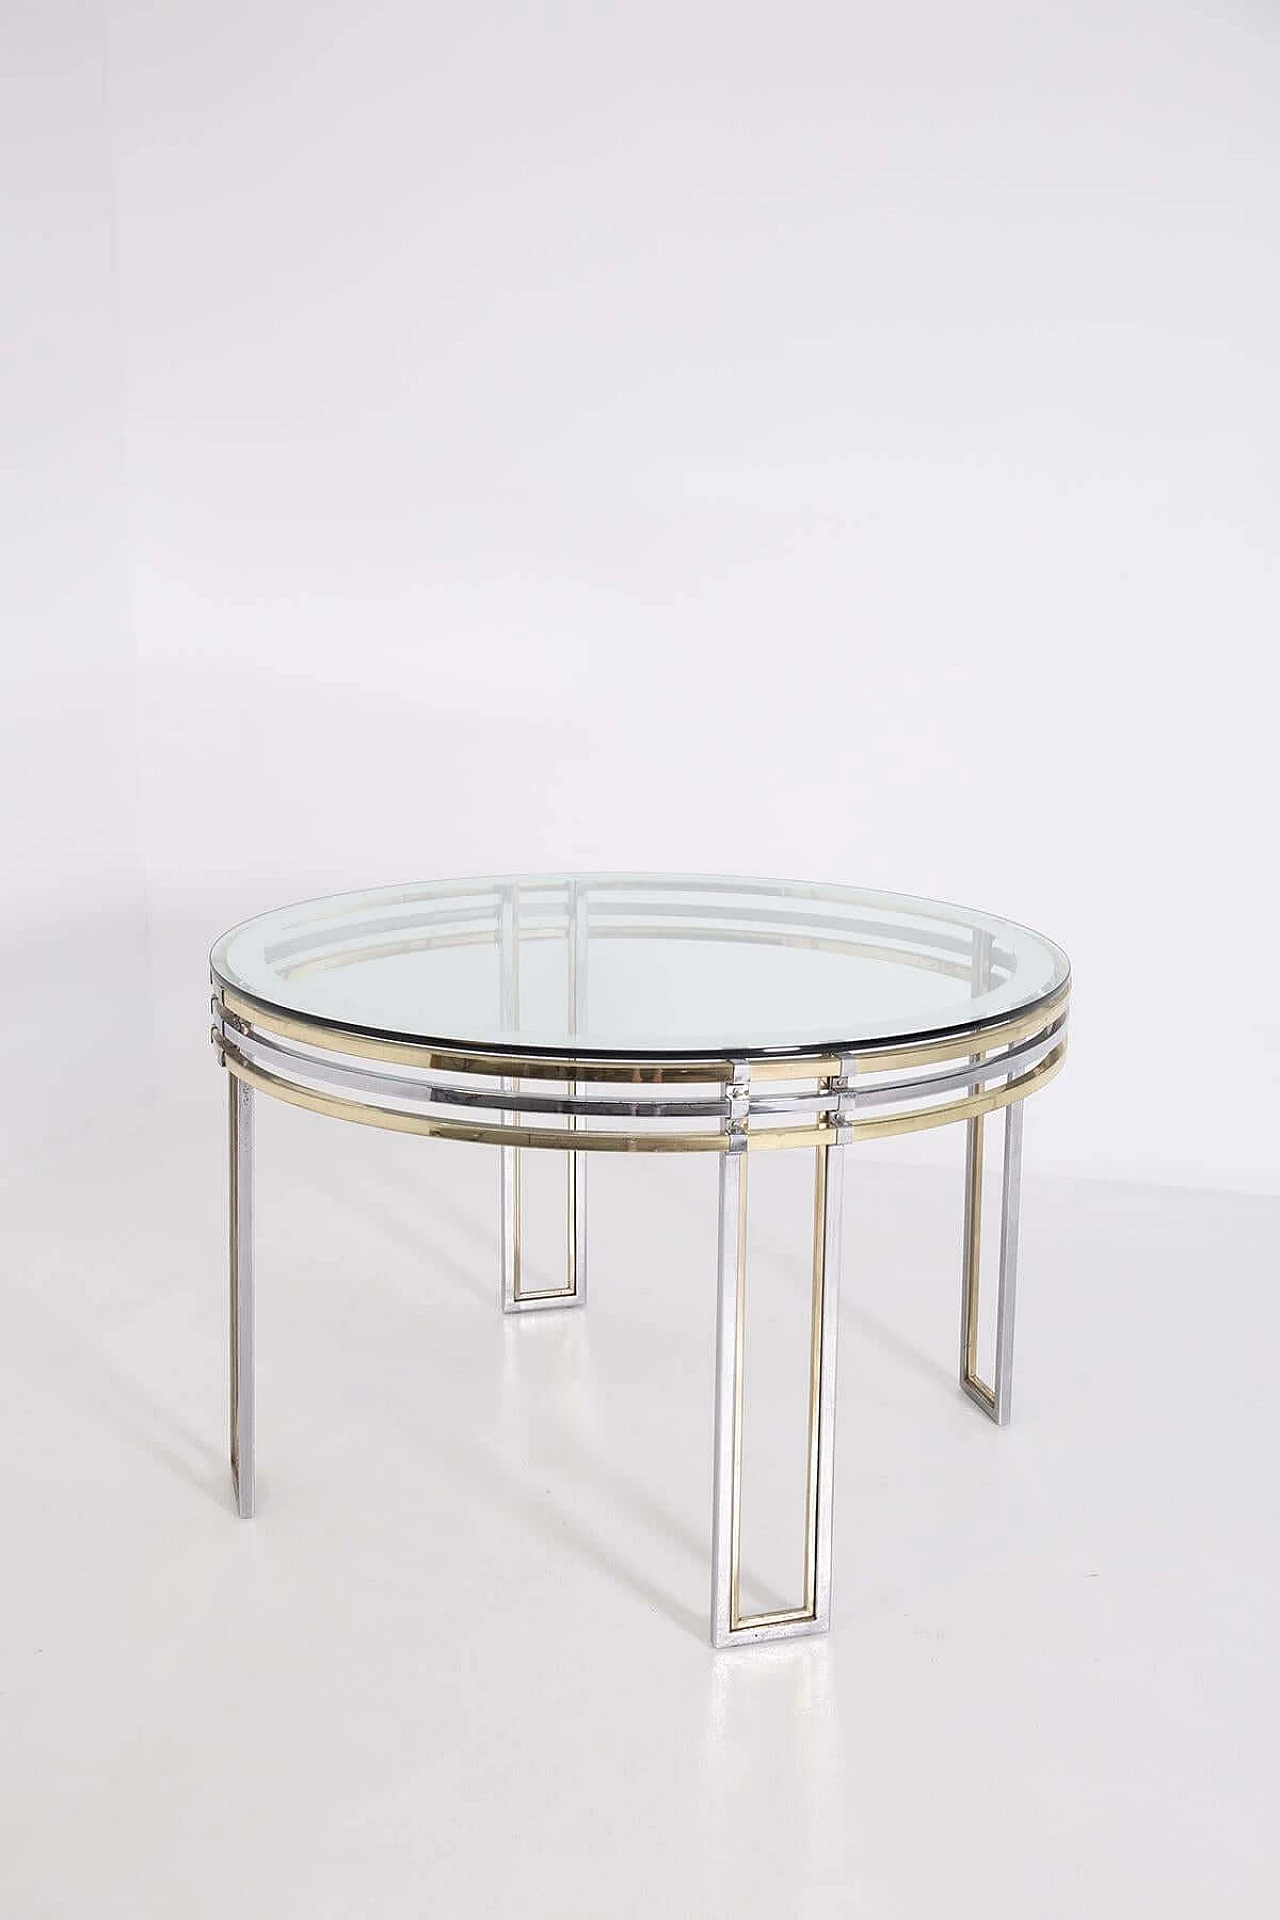 Romeo Rega's round dining table in brass, steel and decorated glass, 1970s 1382588